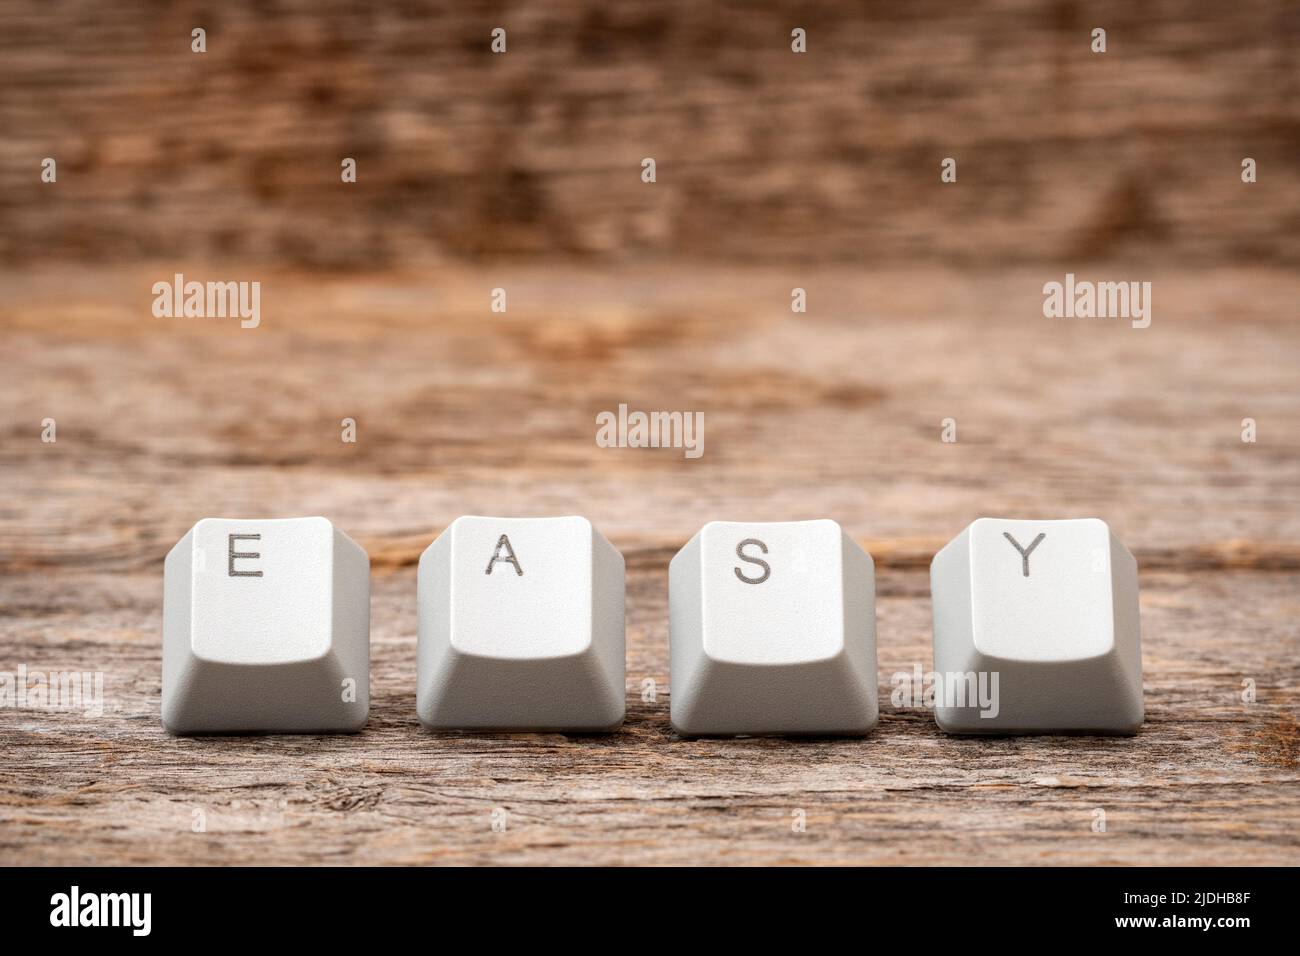 Computer keyboard keys arranged to spell EASY word on the wooden background Stock Photo